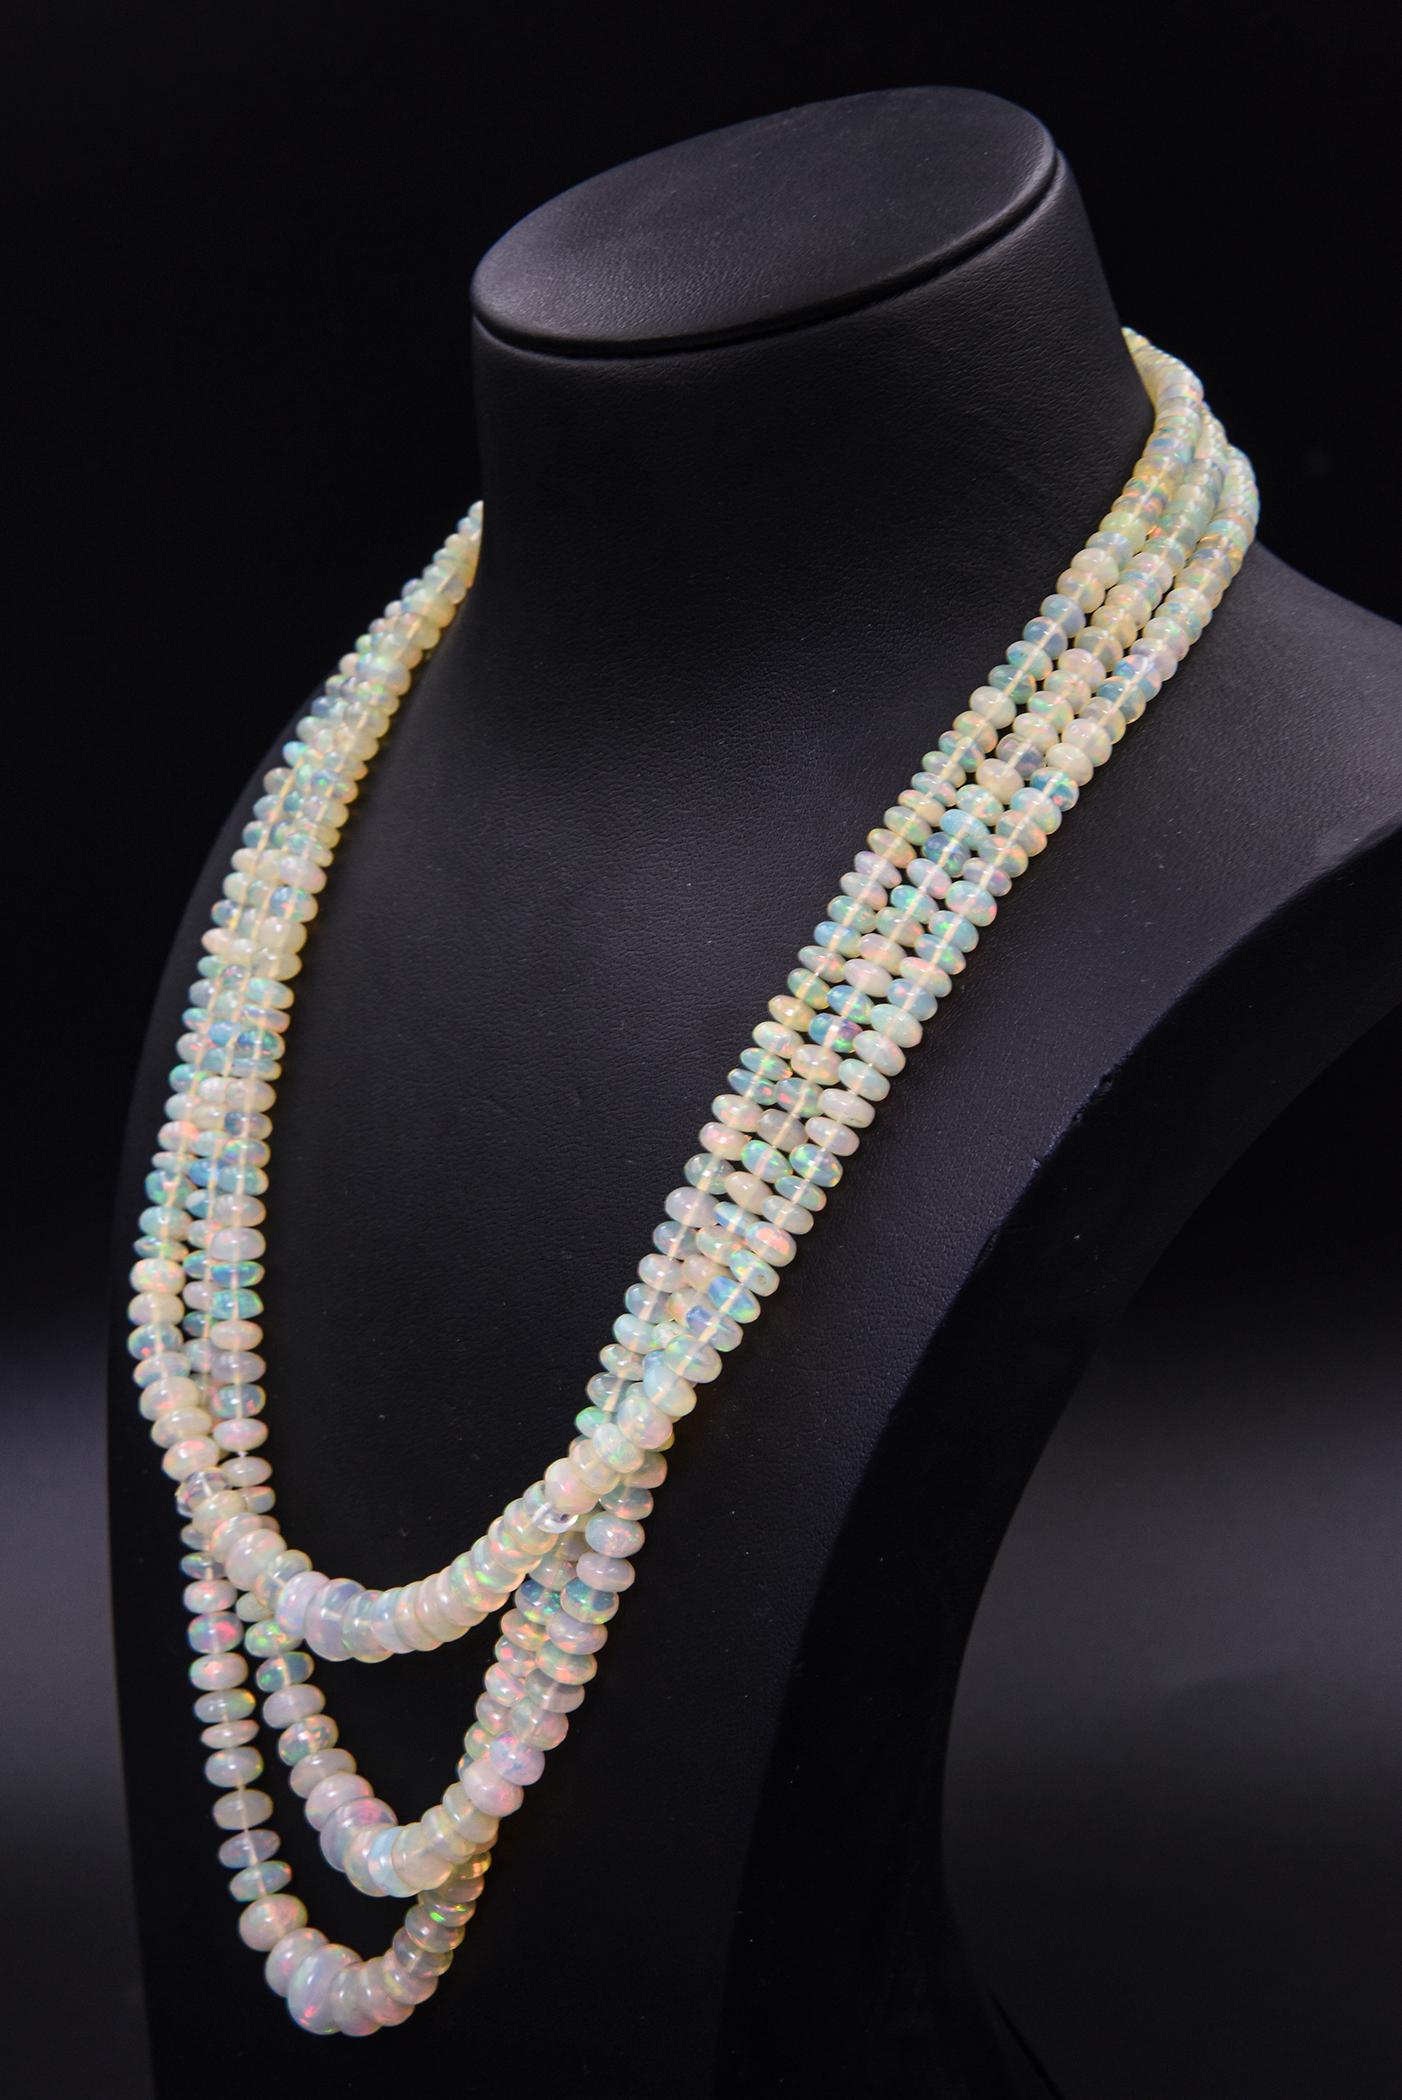 This gorgeous opal necklace features 3 strands of Ethiopian crystal opal beads.  The largest opal is 9.9 mm and the smallest is 4.8 mm.  The total carat weight in opals is 249 carats of vibrant stones.  They are beautiful stones with lots of flashes